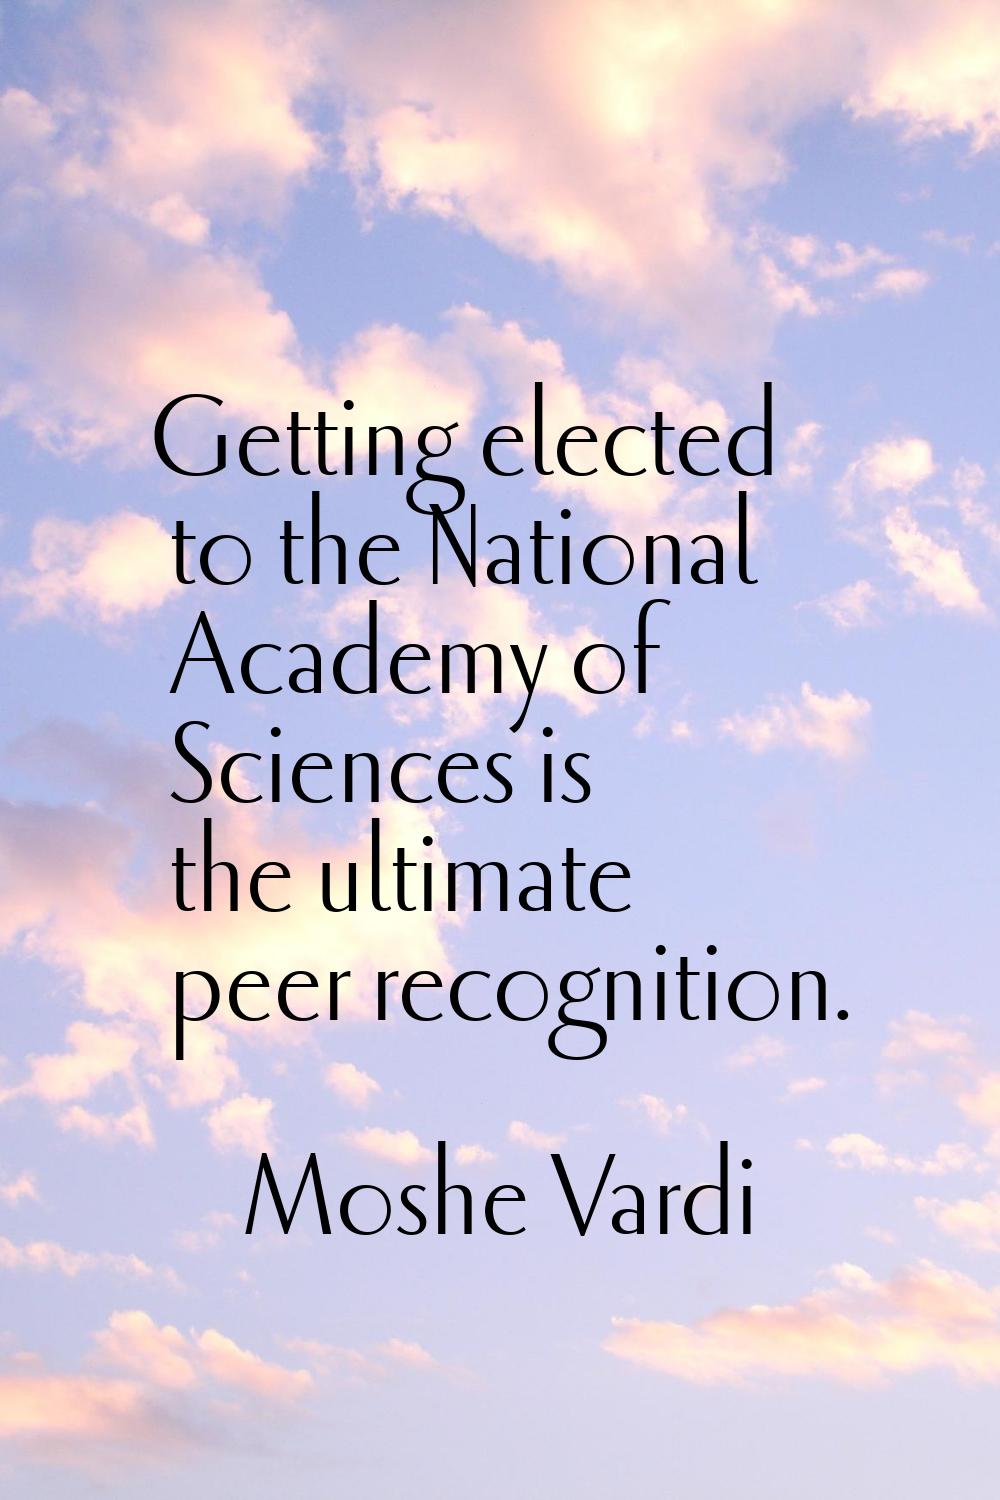 Getting elected to the National Academy of Sciences is the ultimate peer recognition.